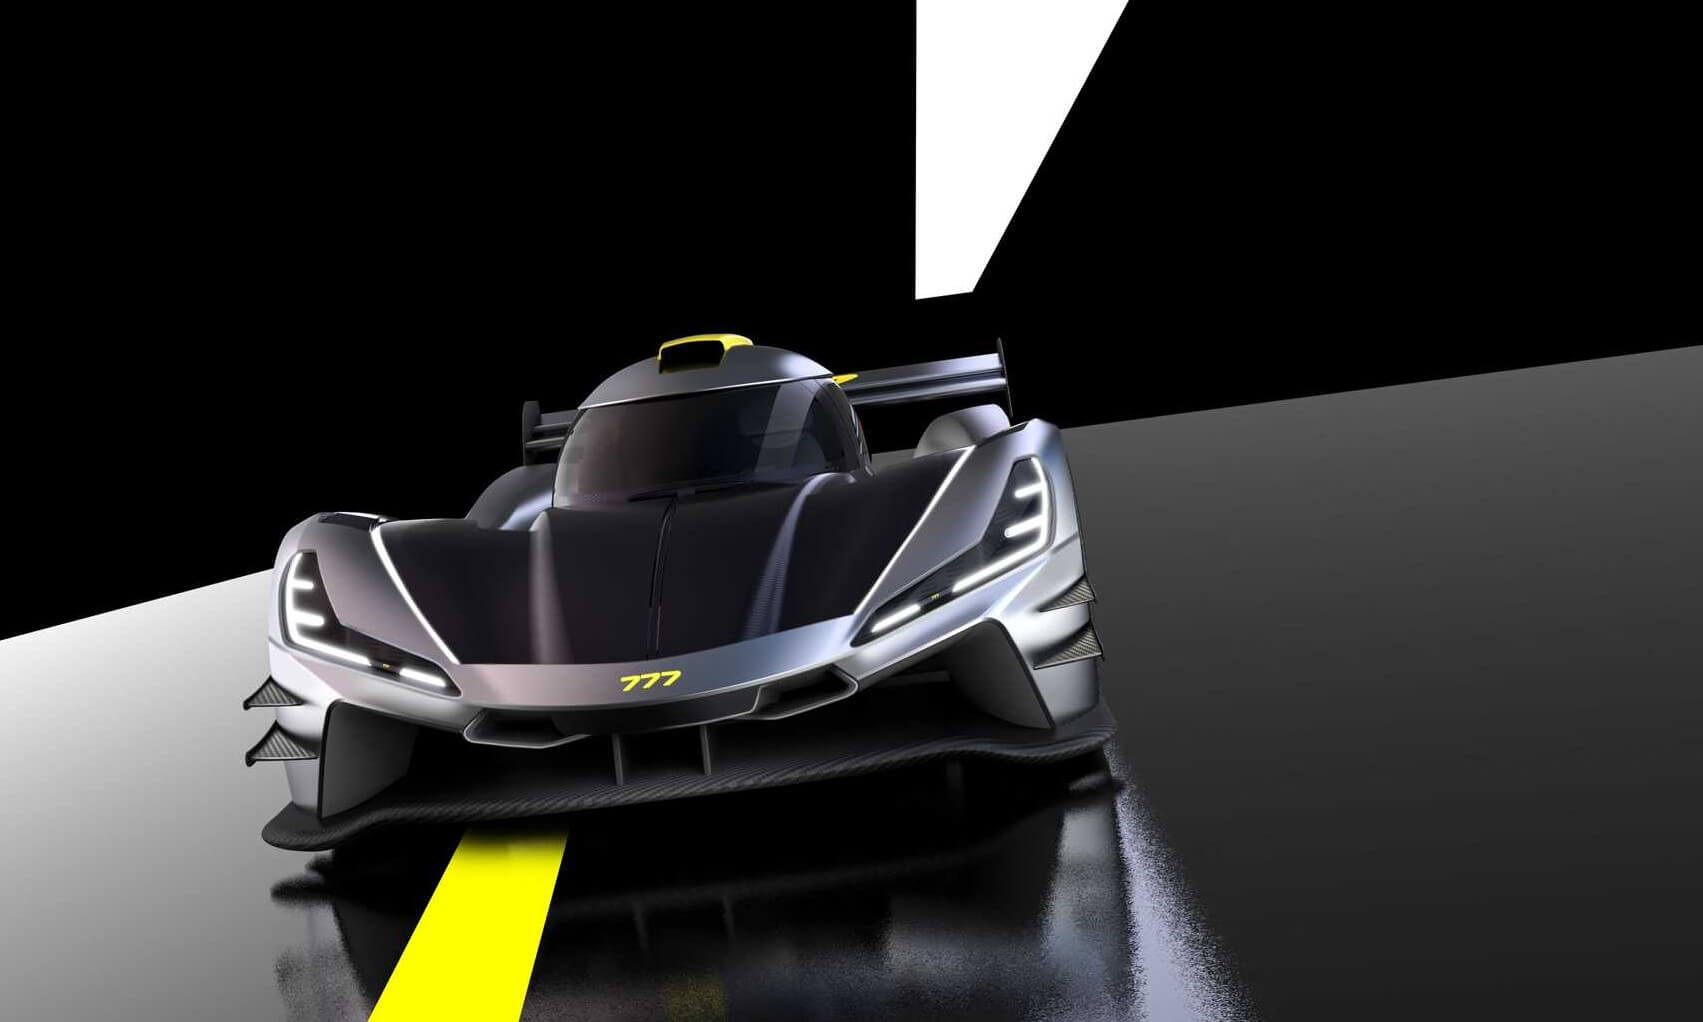 777 Hypercar Is An Ultra-Exclusive Track Machine [w/video]